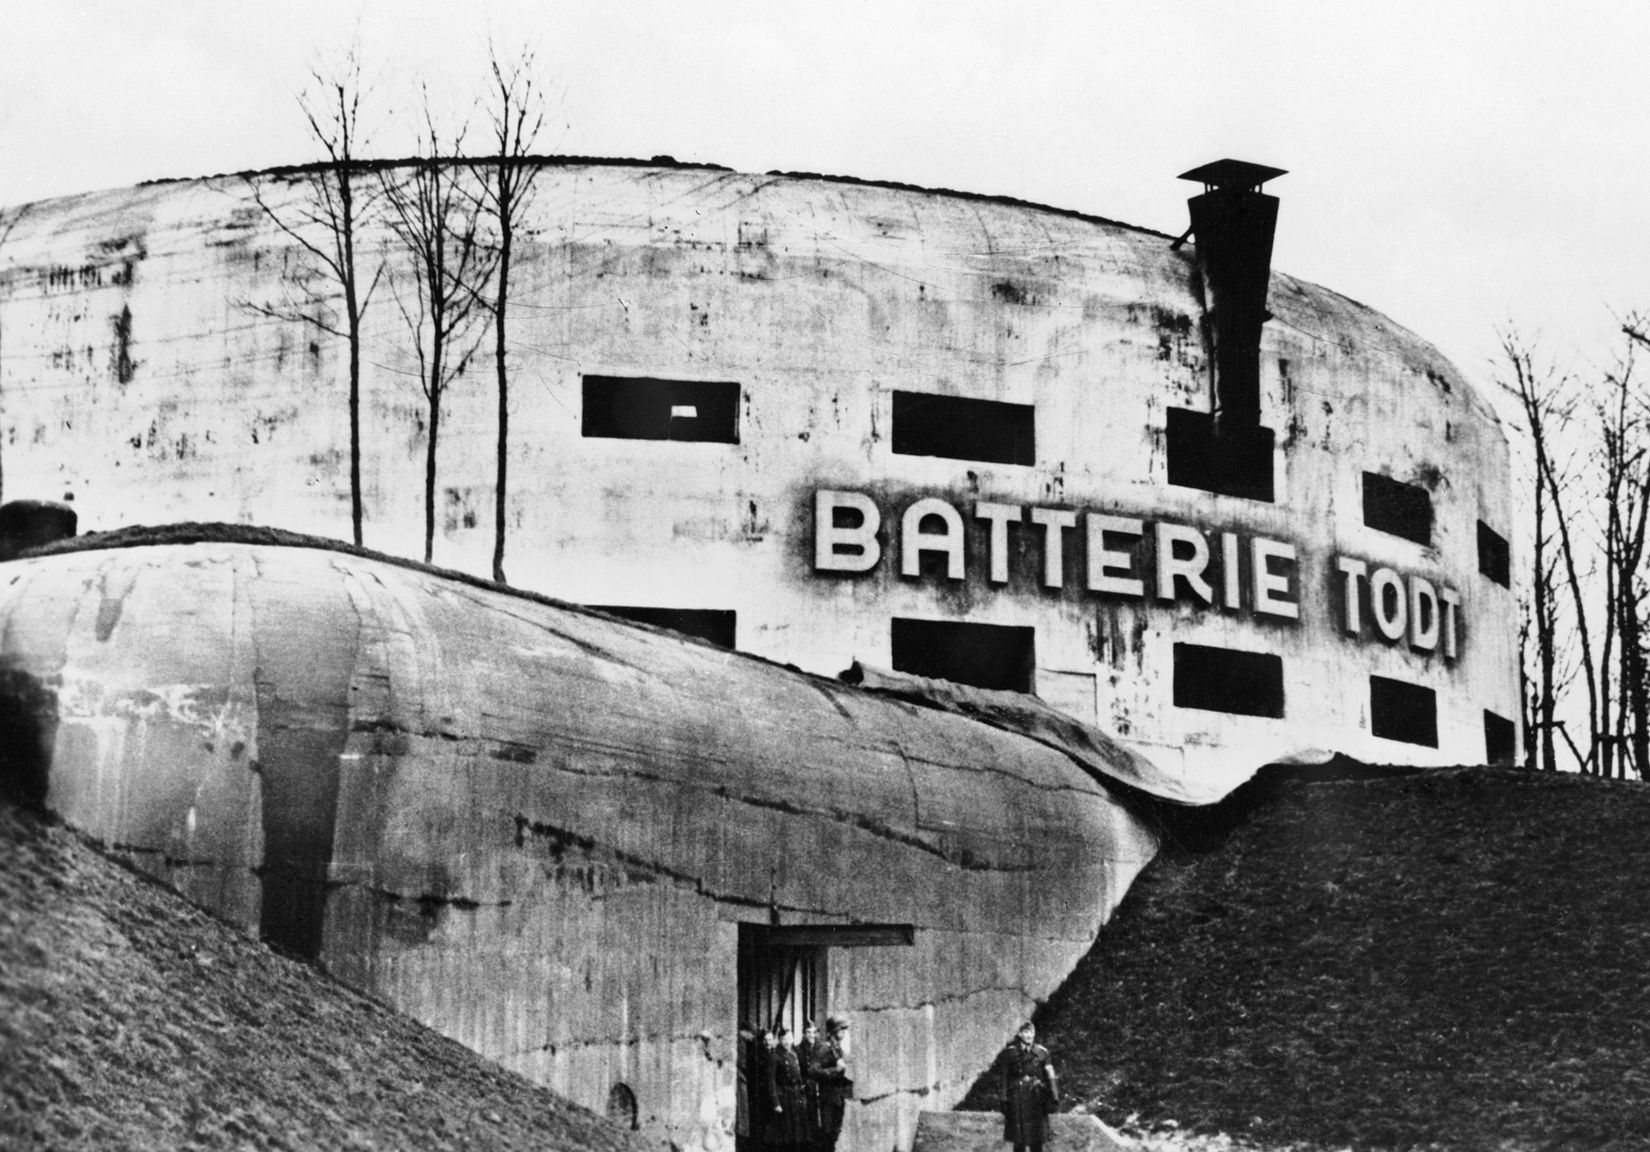 The Todt Battery, a German heavy defensive battery on the Channel coast, named after Fritz Todt, Reich Minister of Armaments and Munitions.